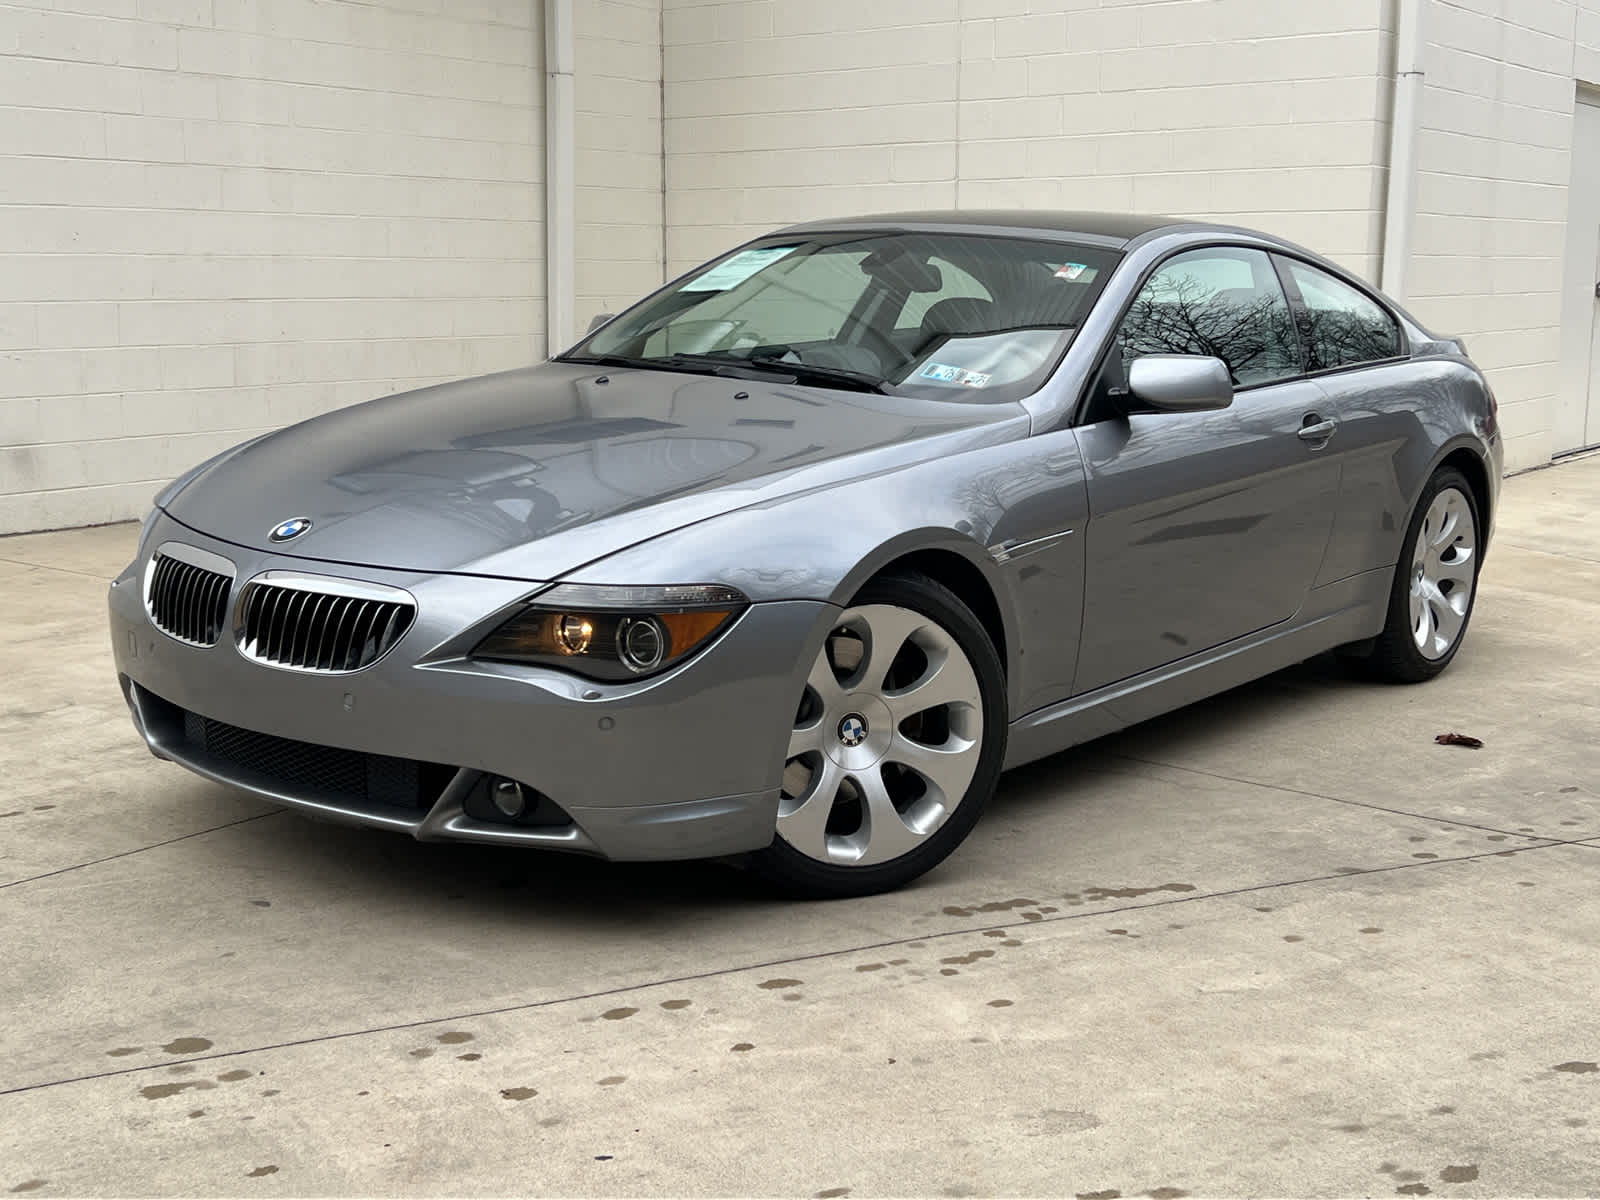 Used 2004 BMW 645Ci For Sale in Monroeville PA 